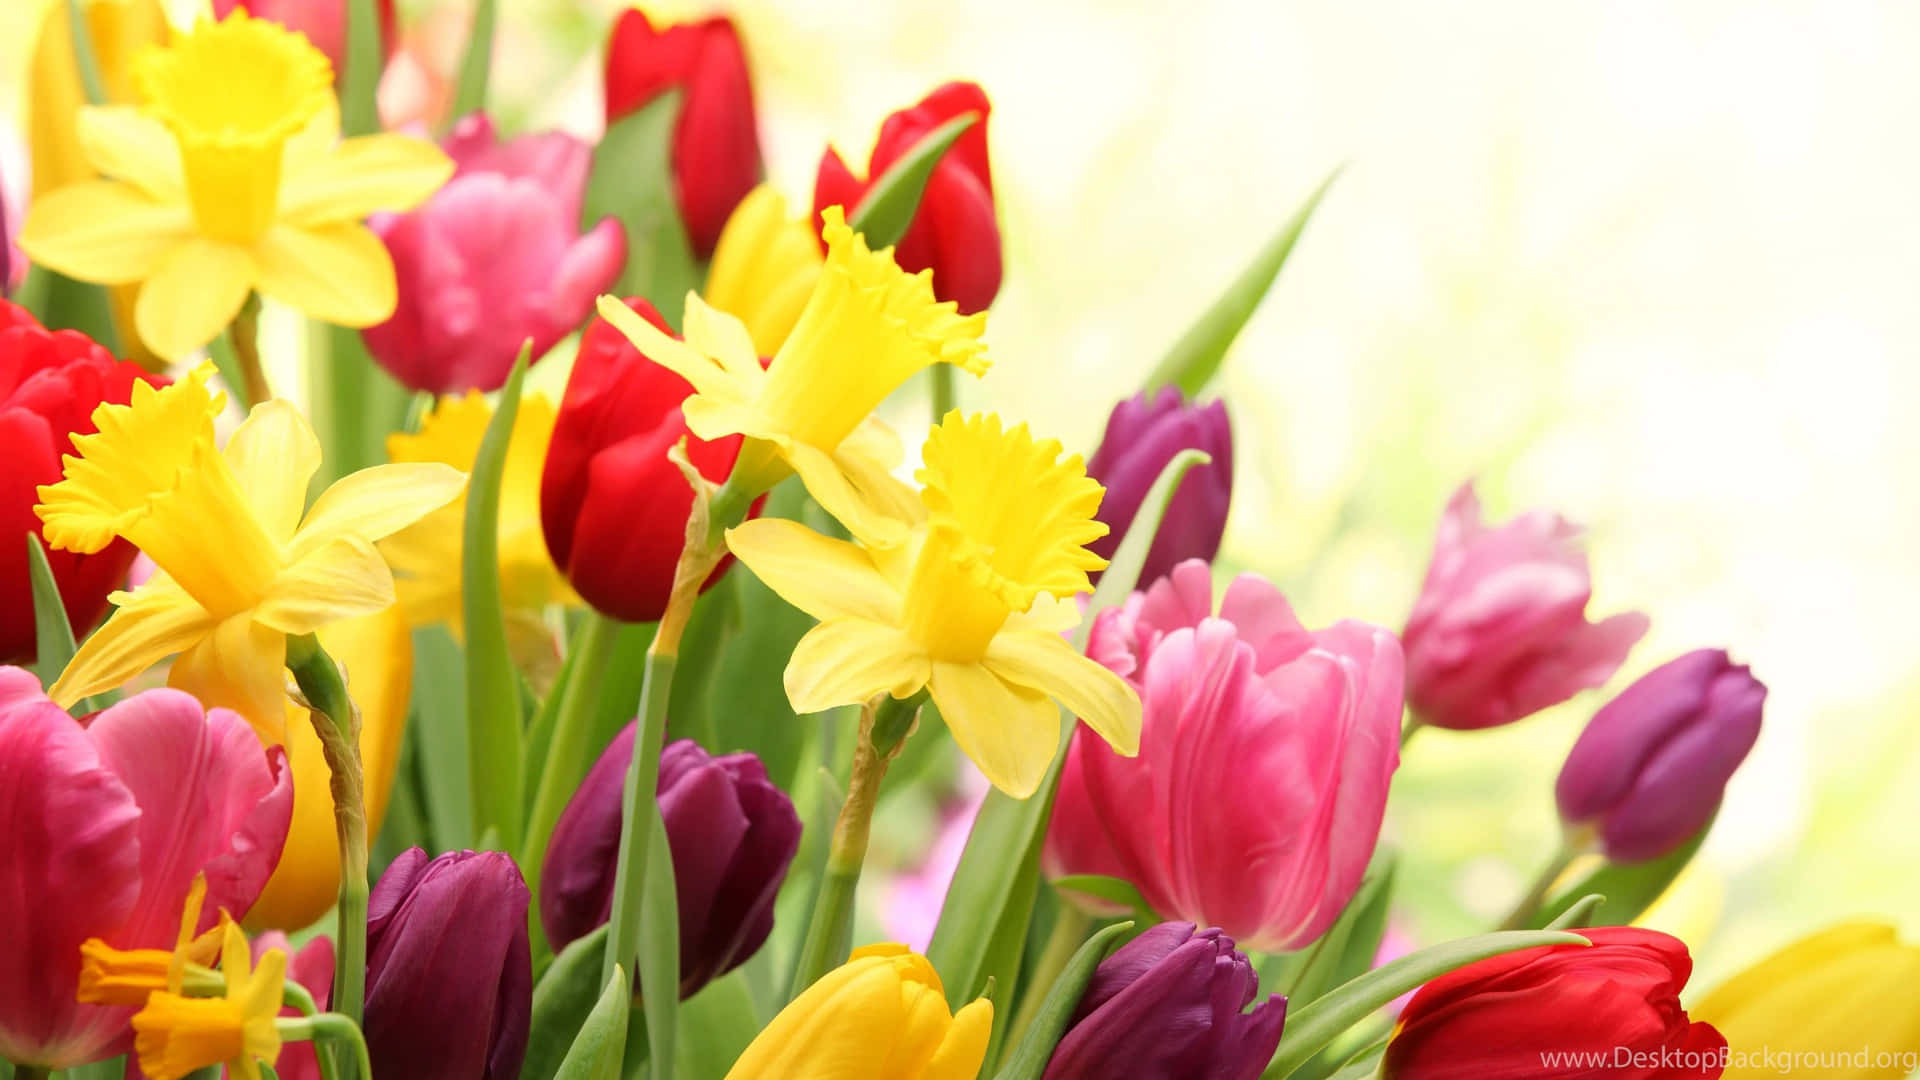 Enjoy the beauty of Spring on your dual monitors Wallpaper